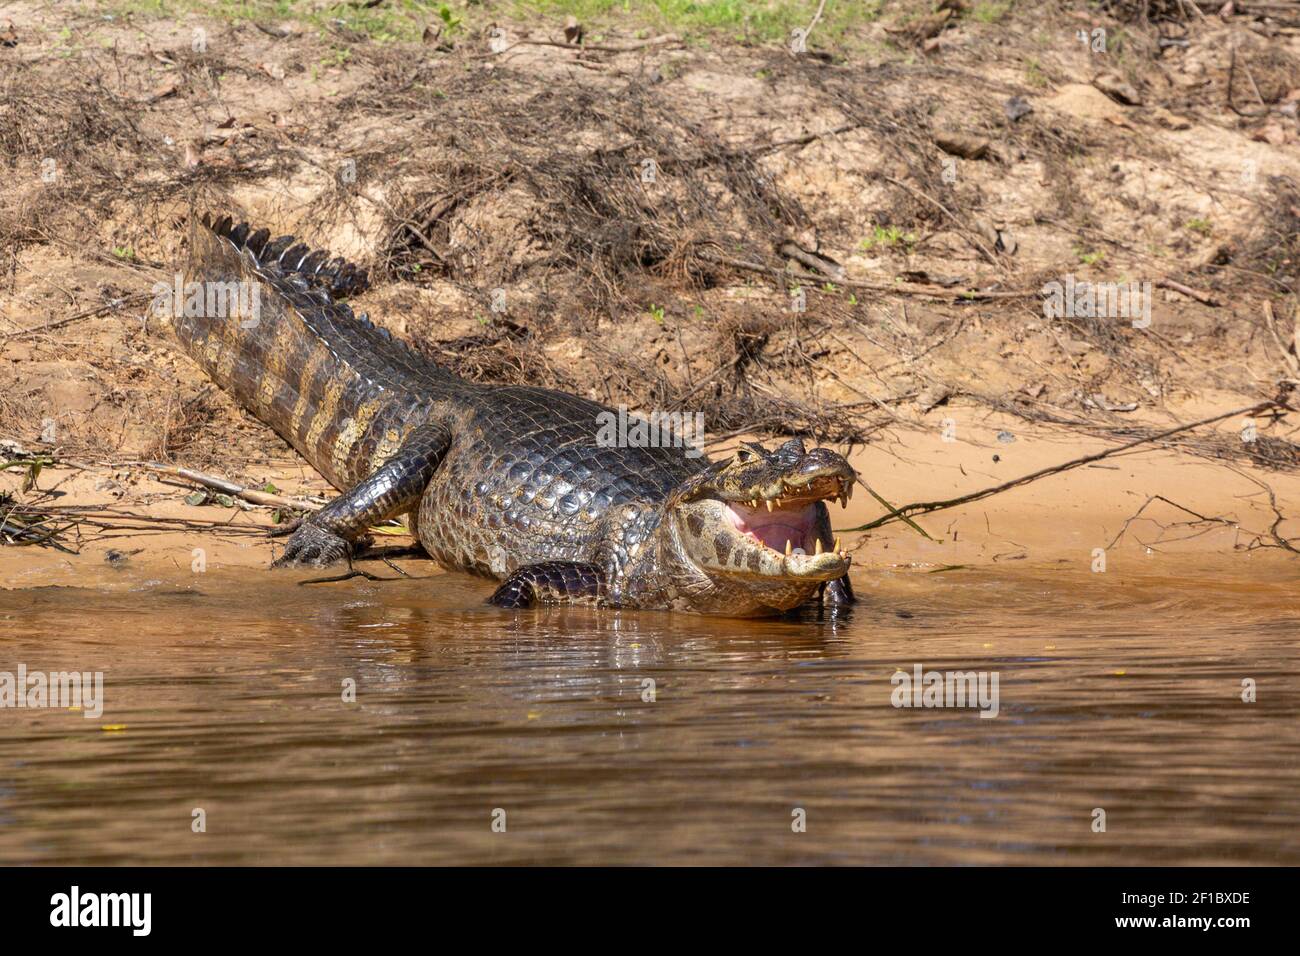 Brazilian Wildlife: A Caiman resting on the shore of the Rio Sao Lourence in the northern Pantanal in Mato Grosso, Brazil Stock Photo